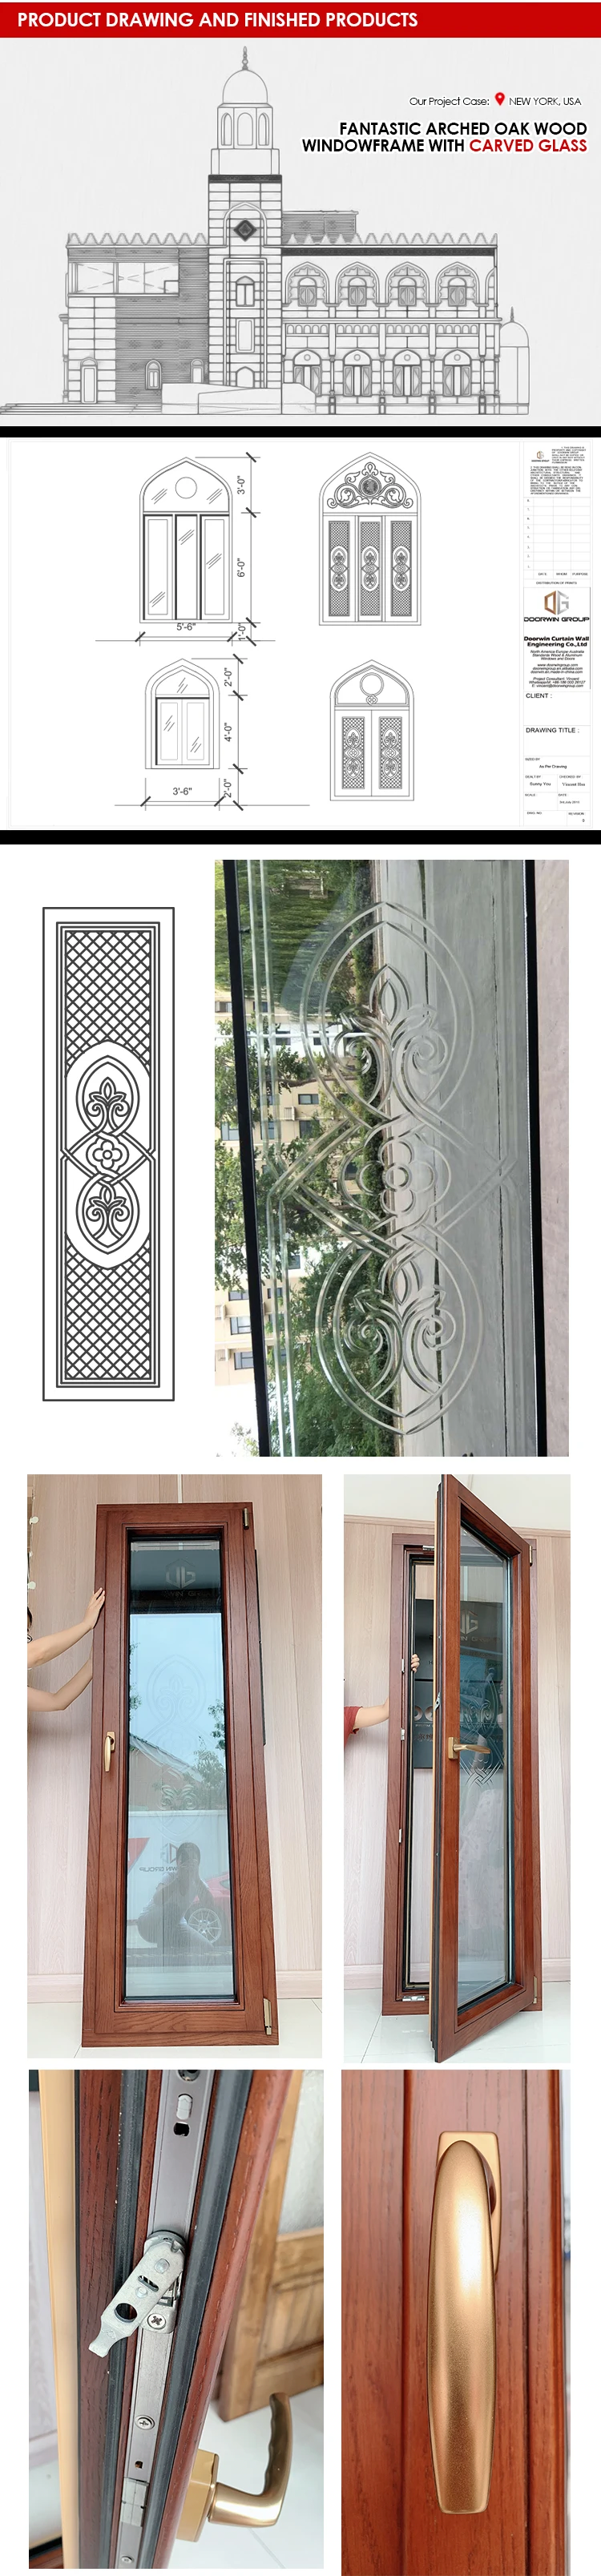 Professional factory stainless steel window grill design stained glass windows near me